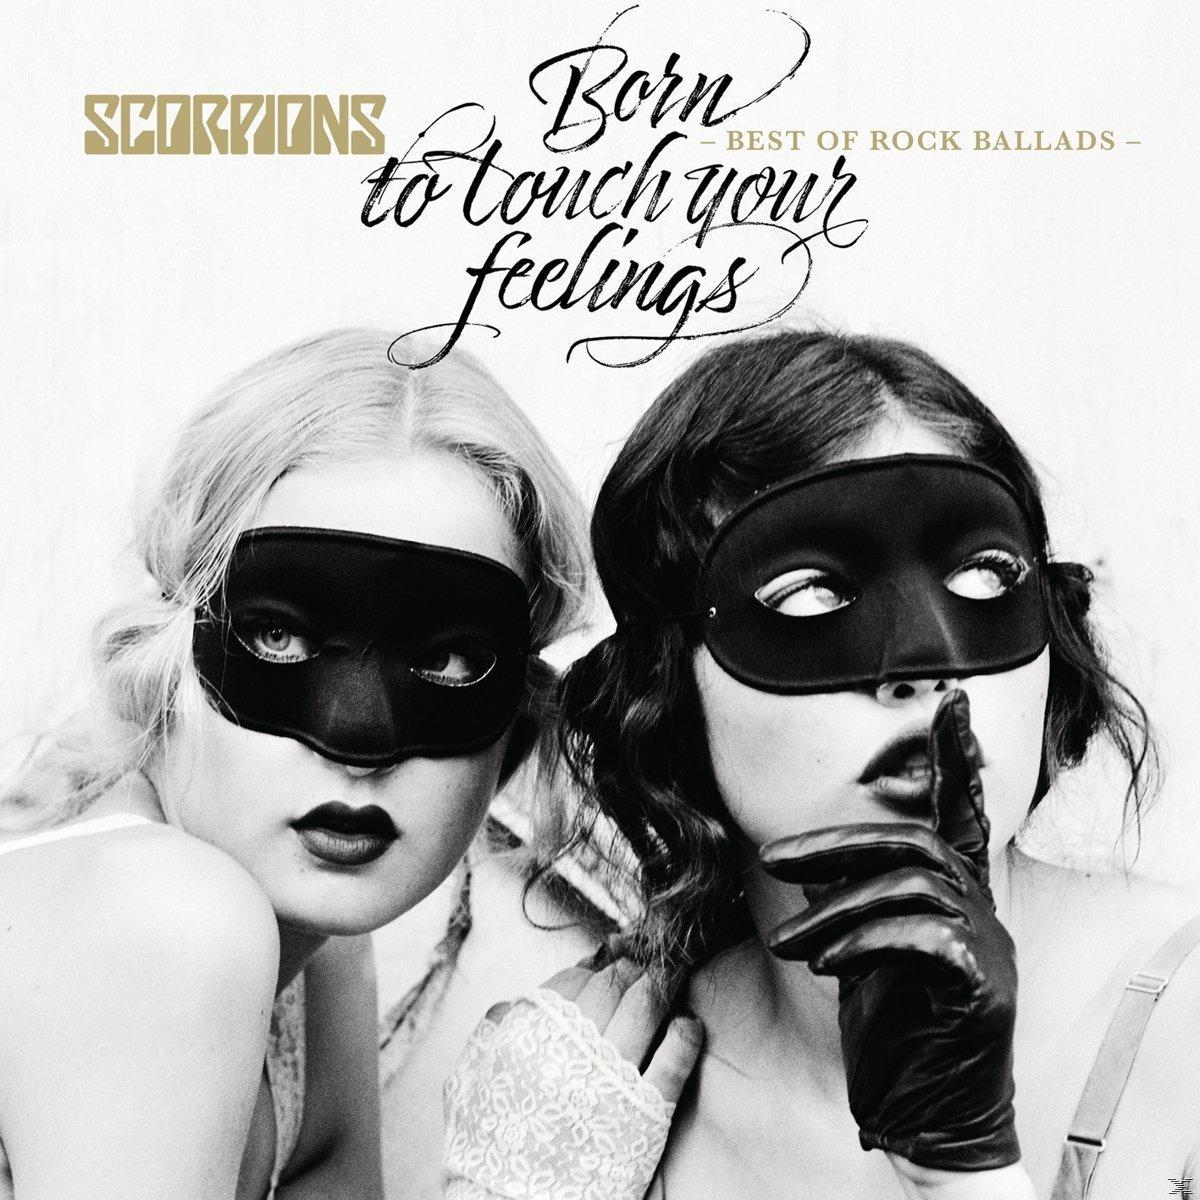 Scorpions - Born To Your Rock (CD) Touch Feelings-Best of Ballads 